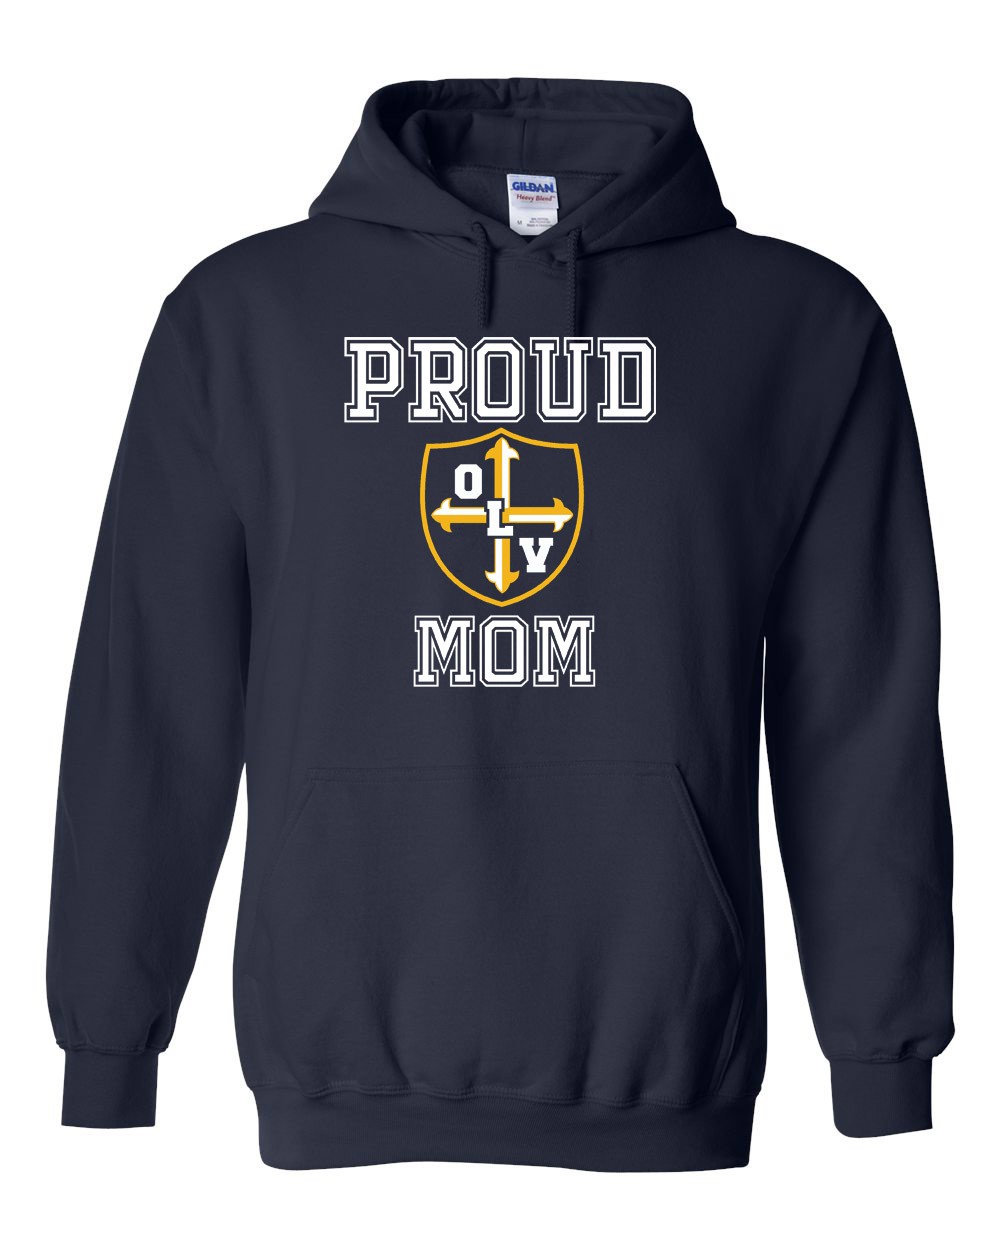 OLV Spirit Pullover Hoodie w/ Proud Mom Logo - Please Allow 2-3 Weeks for Delivery